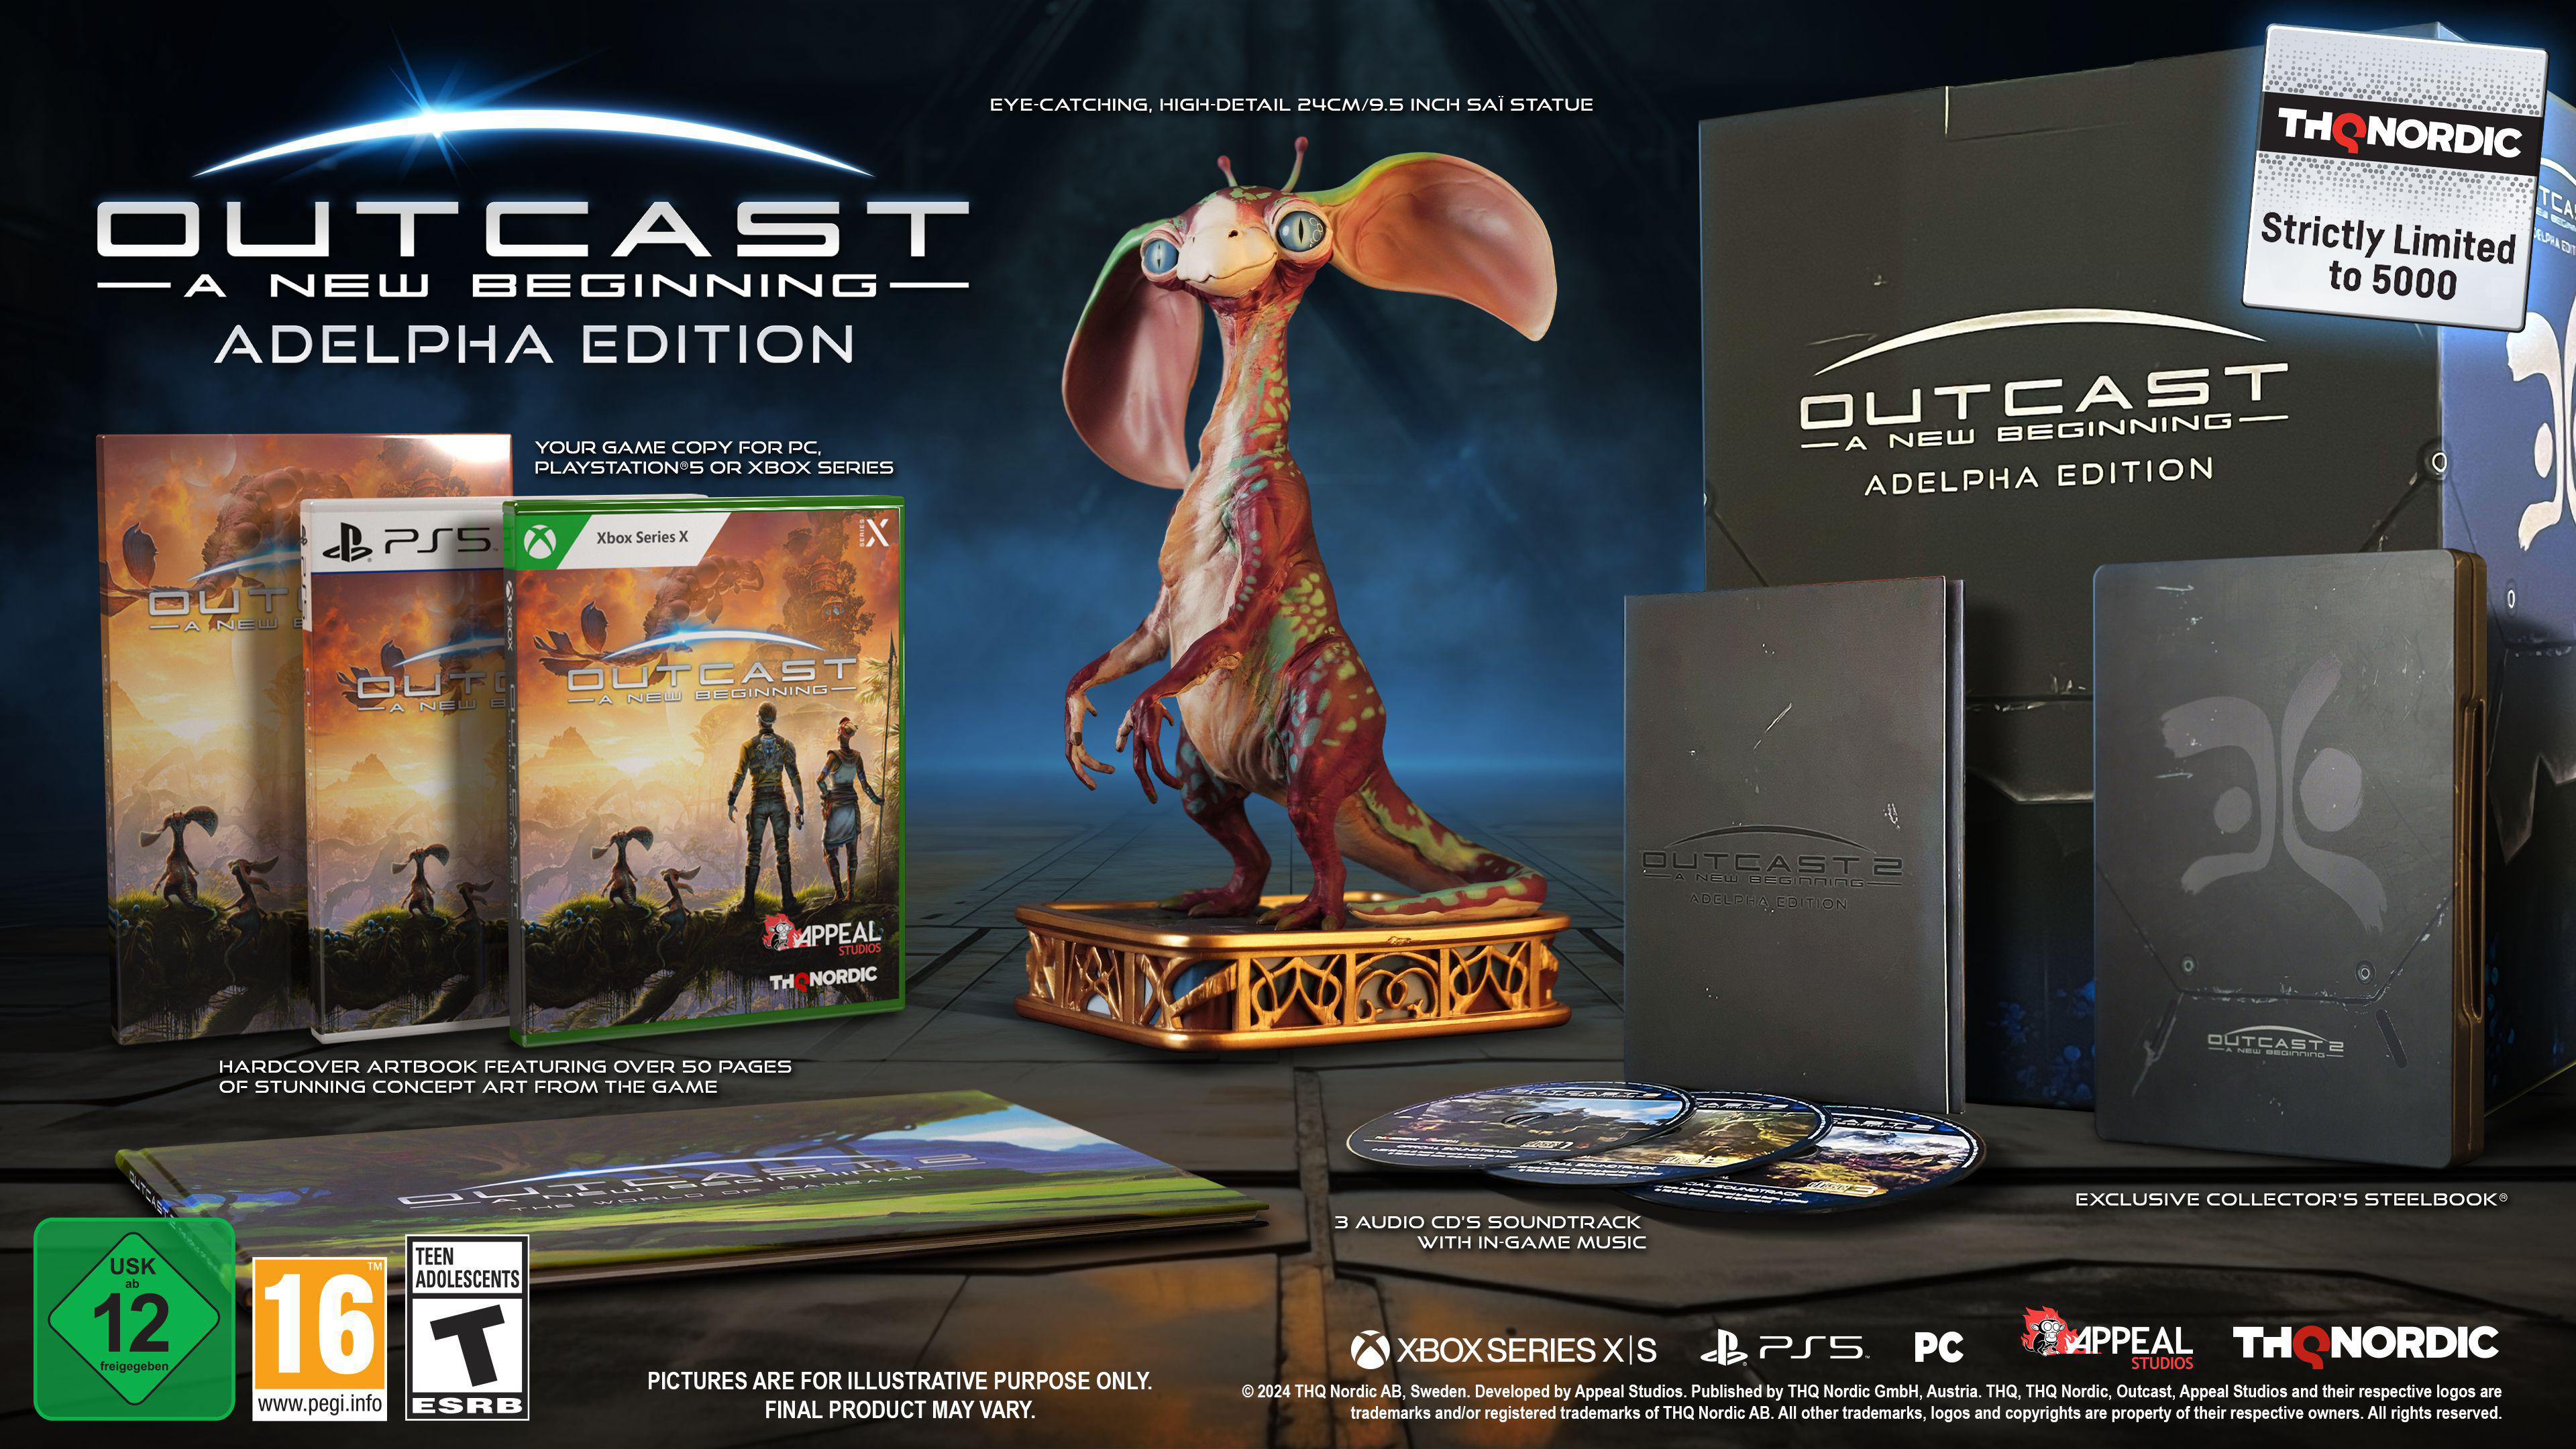 Outcast - A New Beginning [PC] - Edition Adelpha 